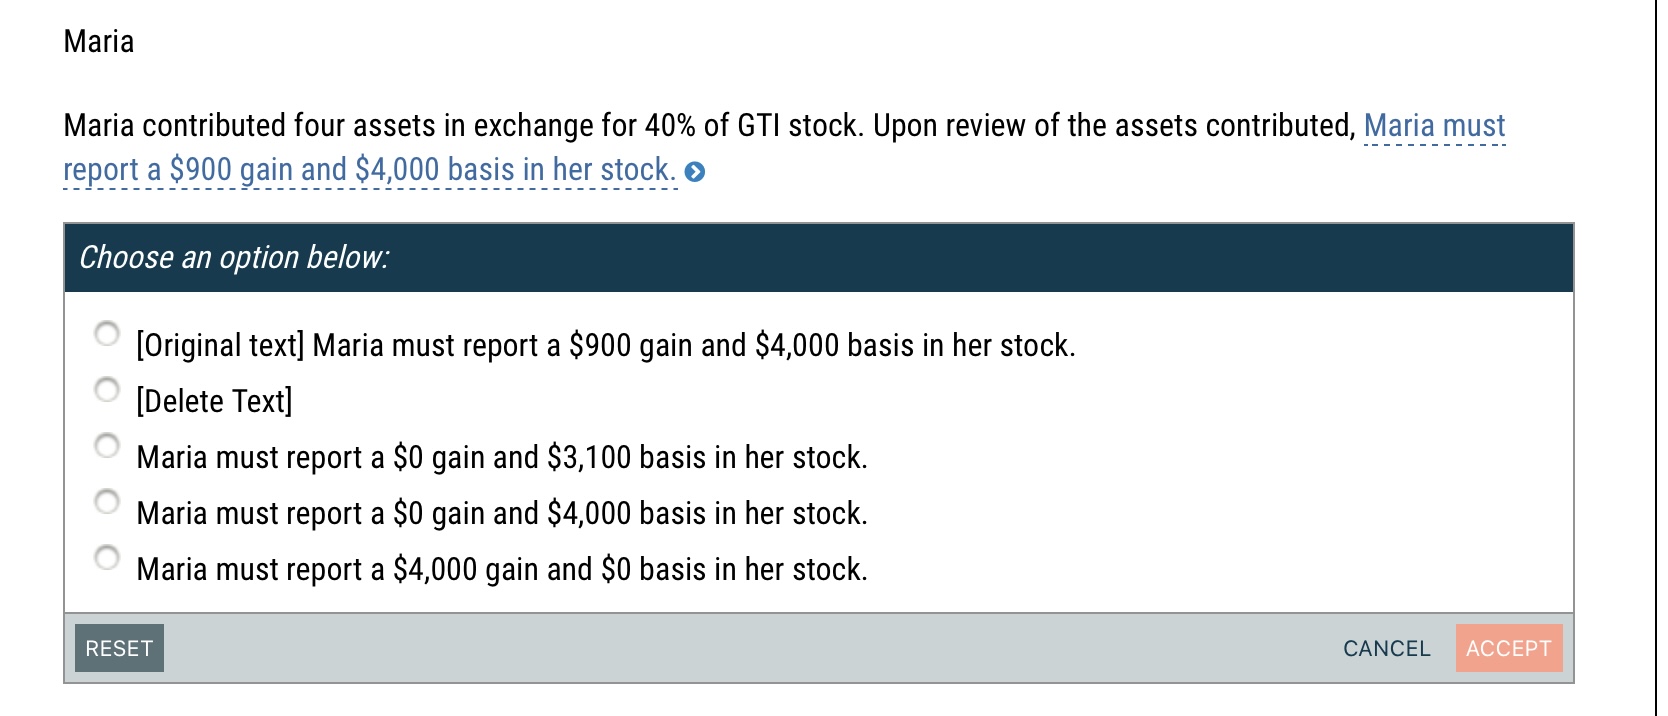 Maria Maria contributed four assets in exchange for 40% of GTI stock. Upon review of the assets contributed,